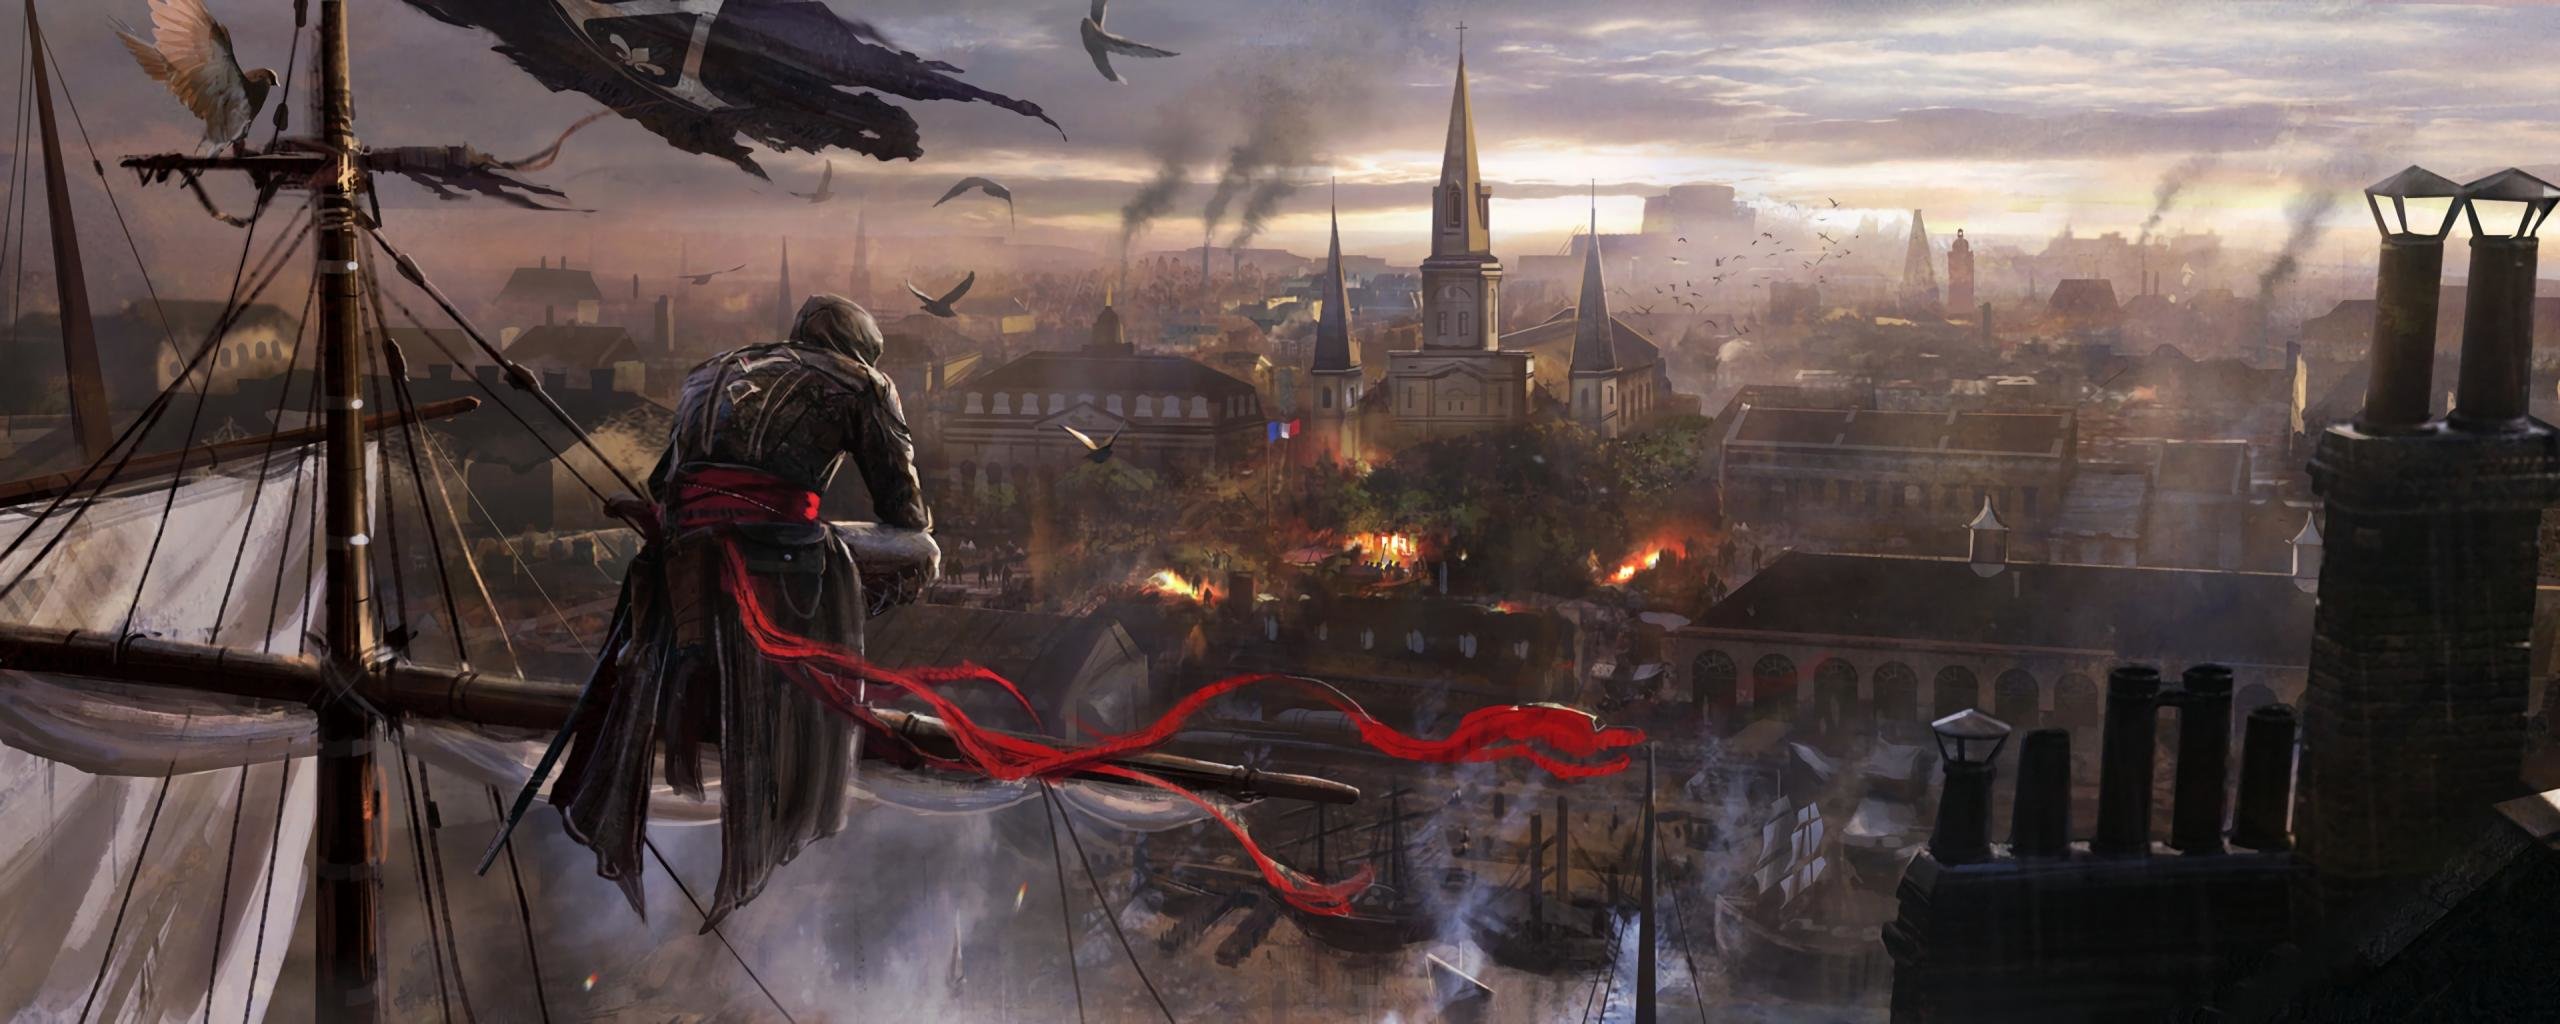 Best Assassin S Creed - Assassin's Creed Syndicate Dual Monitor - HD Wallpaper 